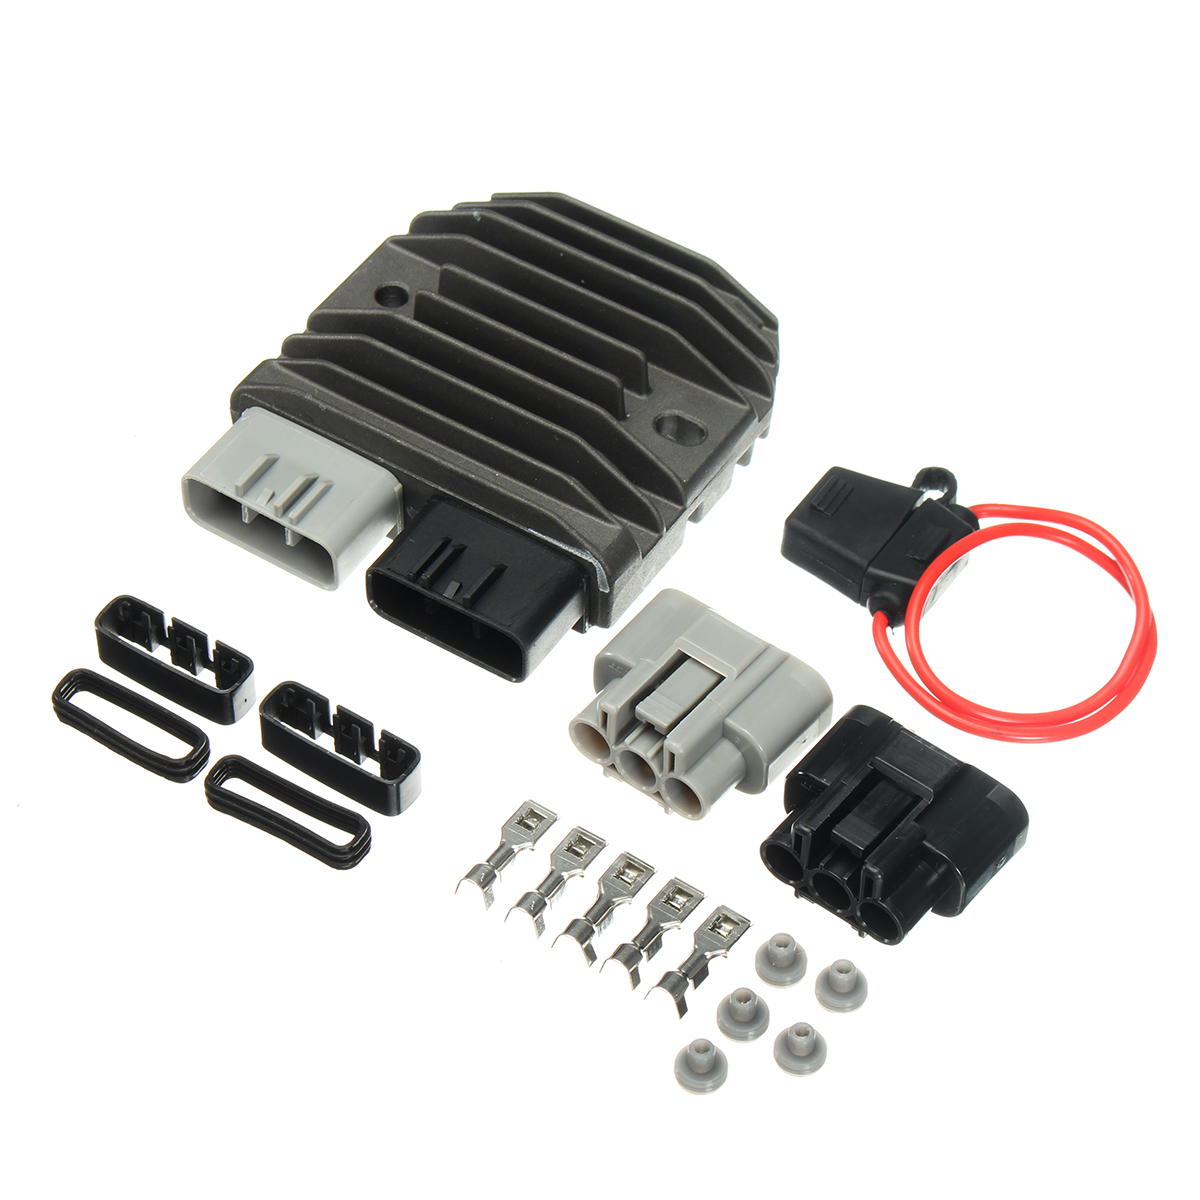 Regulator Rectifier Upgrade Kit Replaces FH012AA for SHINDENGEN MOSFET FH020AA